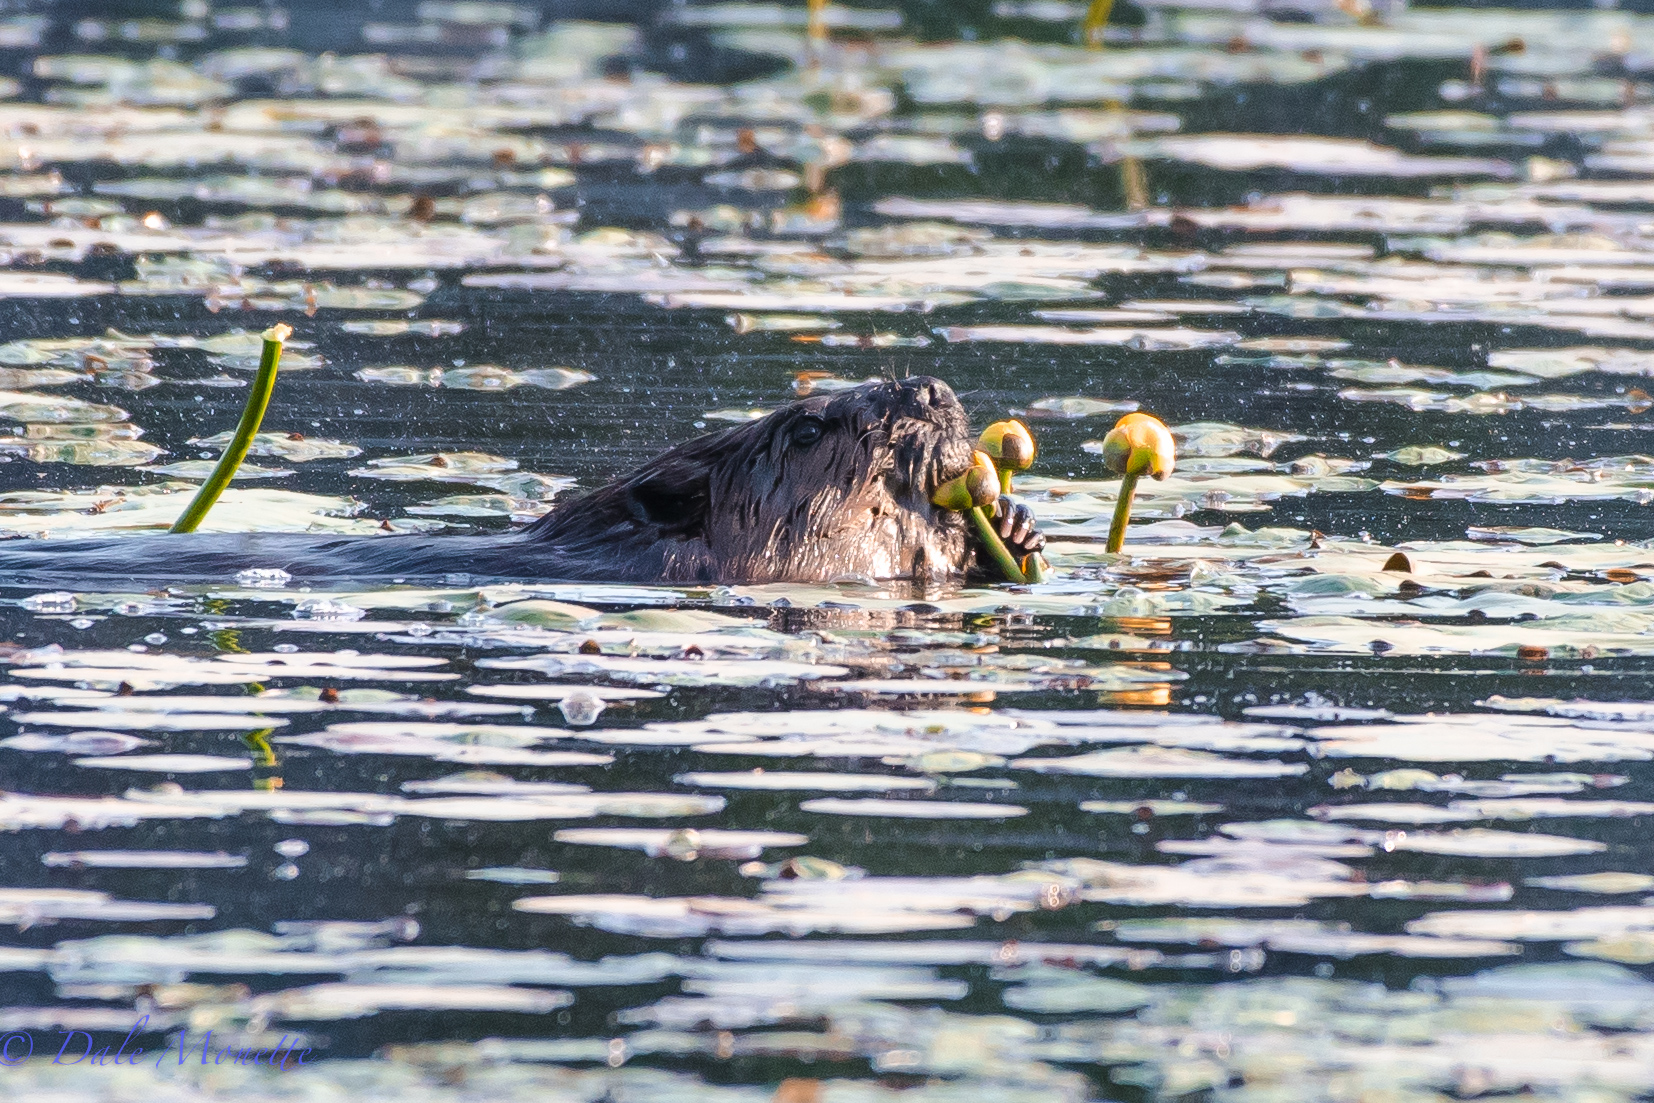   This beaver was eating water lily blossoms for breakfast today. &nbsp;I have seen this before and these guys seem to really like the stems also. &nbsp;5/23/16  